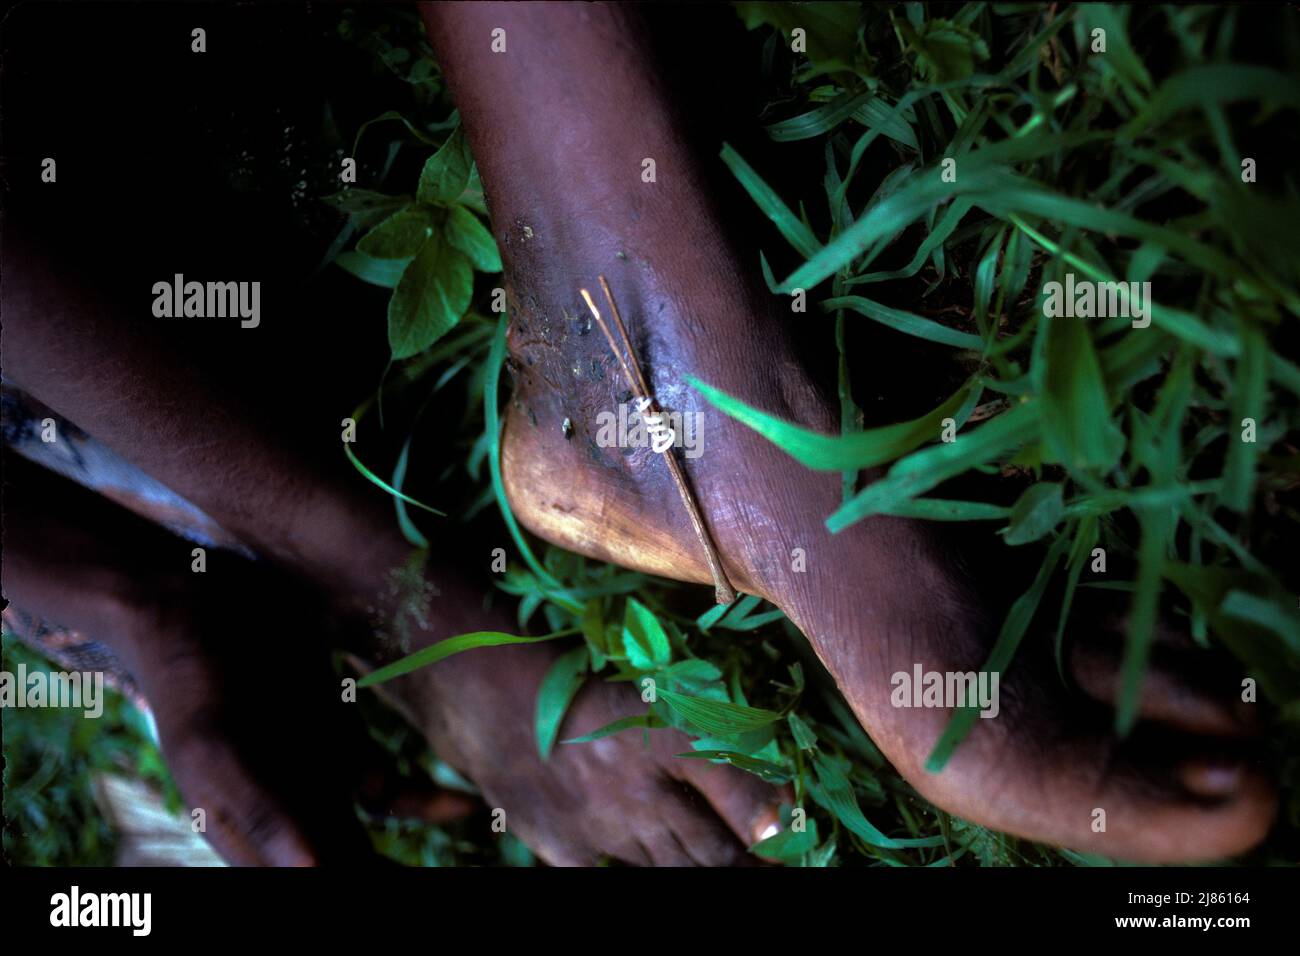 Extraction of a Guinea Worm Benin Stock Photo